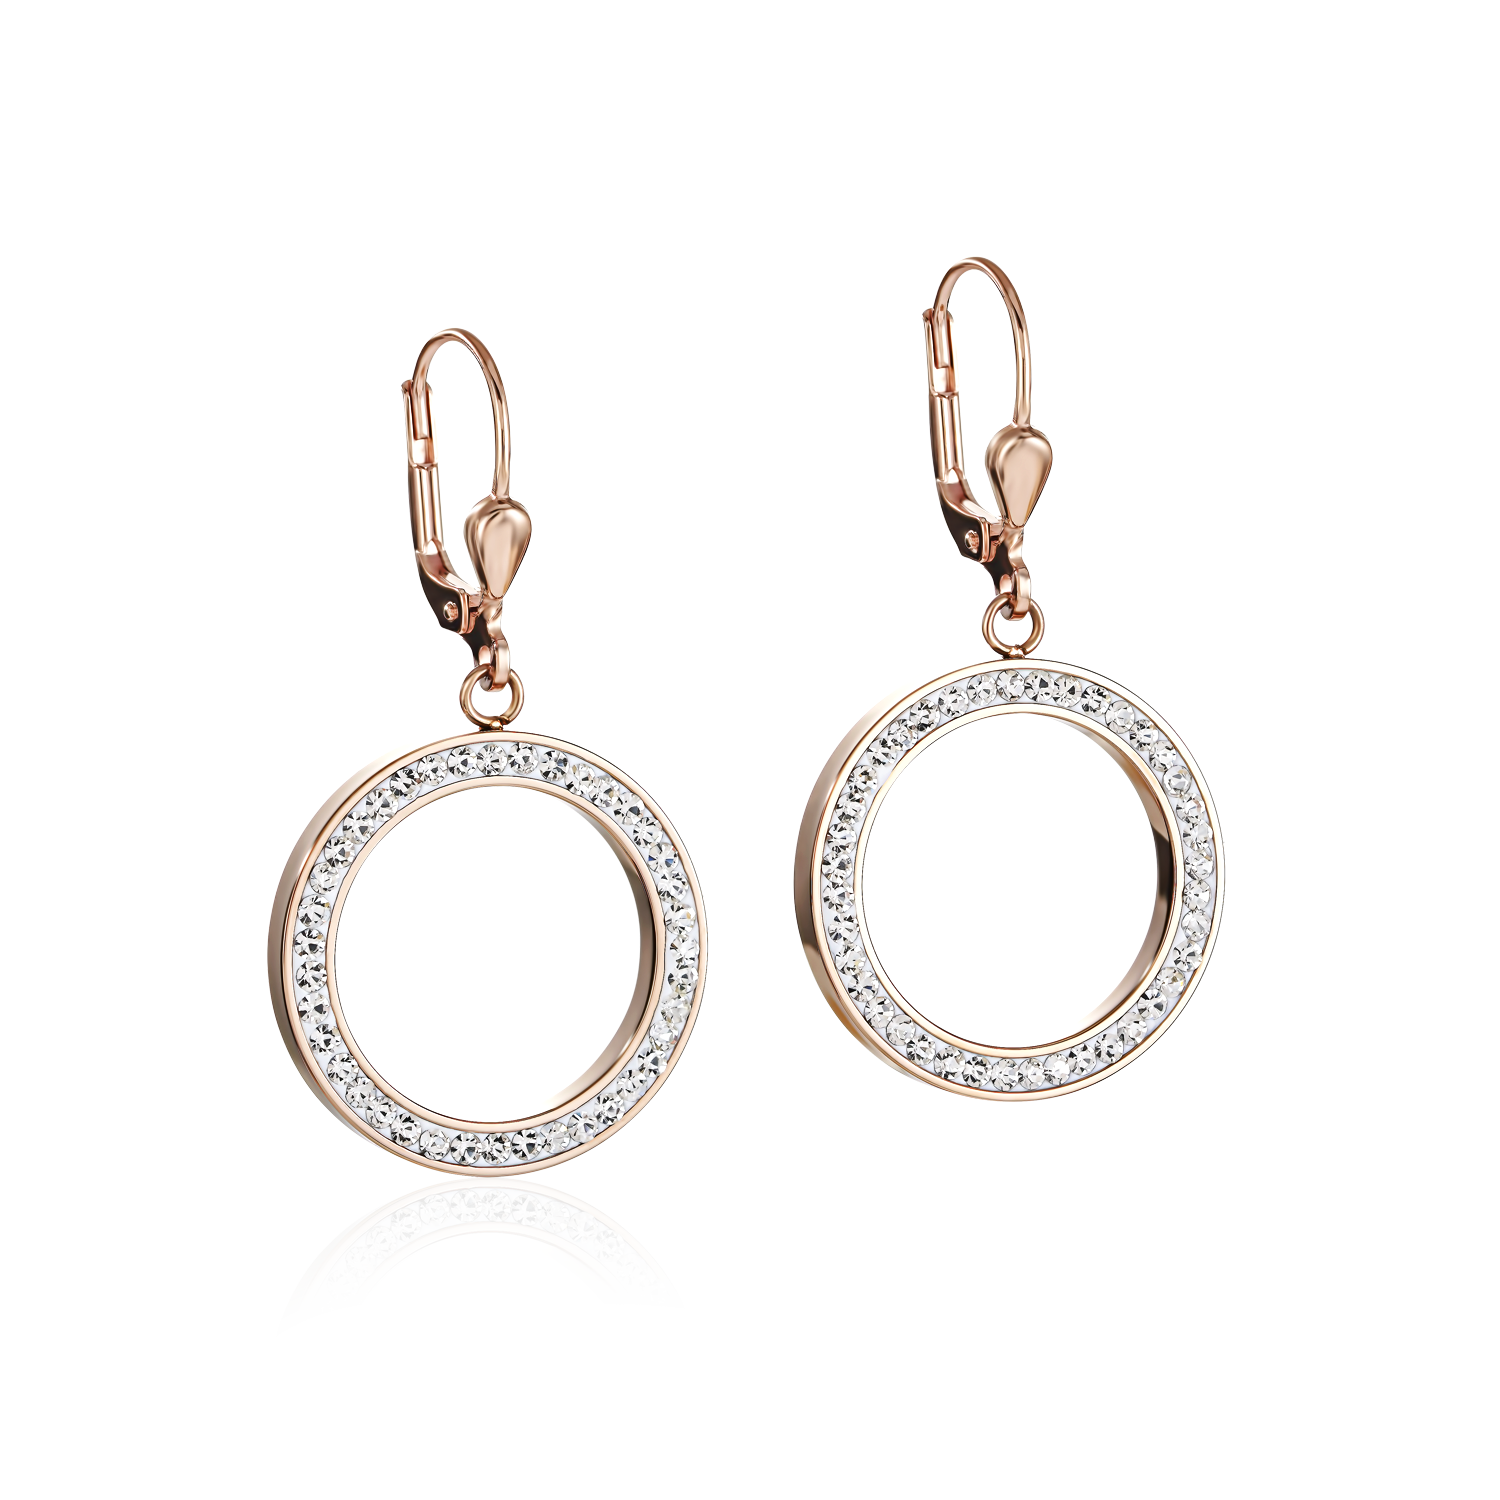 Earrings Ring Crystals pavé & stainless steel rose gold & crystal